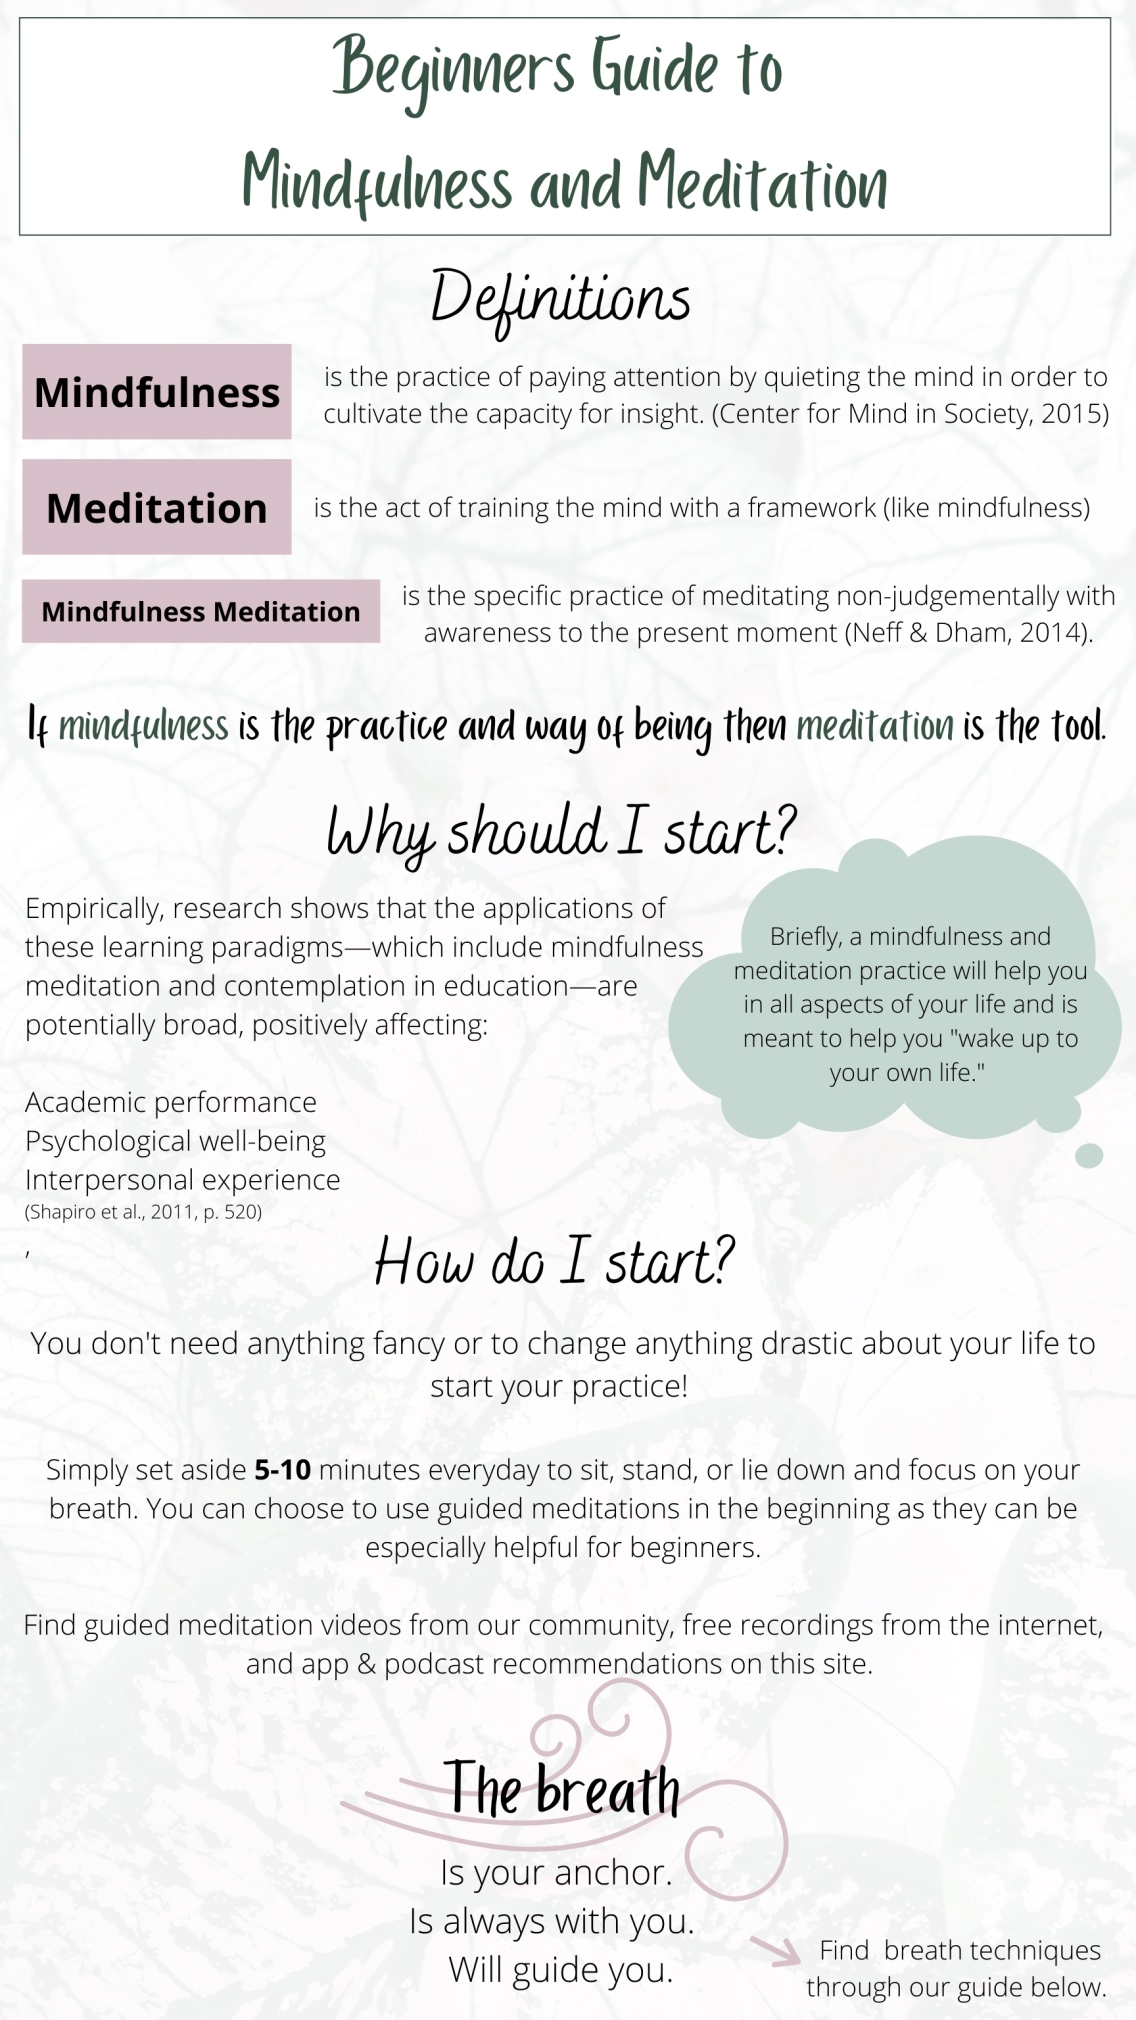 Beginner Meditation Guide includes definitions, why should i start, and how to start sections and instructions. The background is a leaf pattern faded with pink and pale green as the accent colors of the poster.  